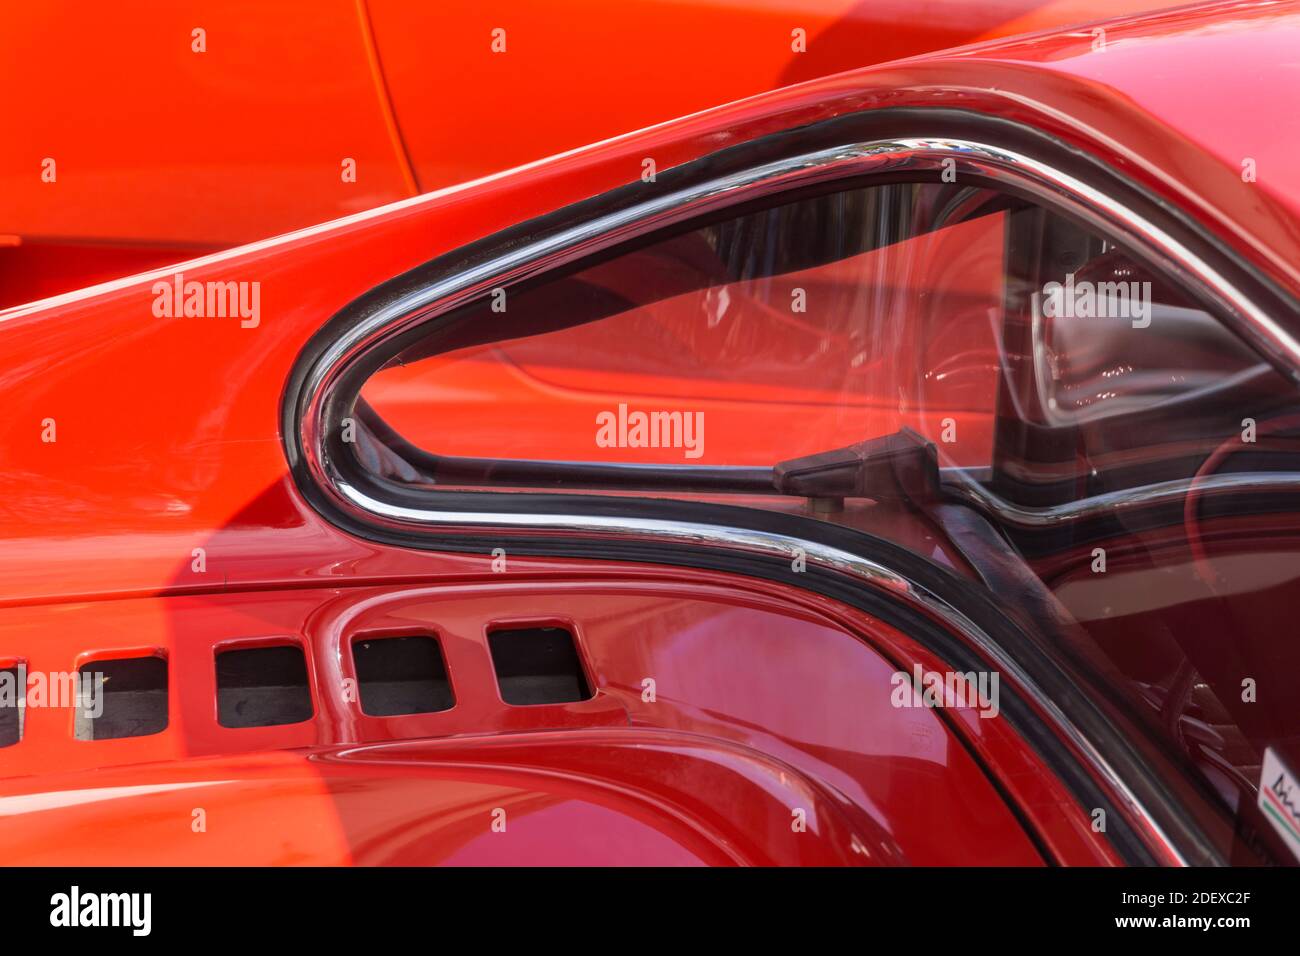 Close up detail of the curved rear window and engine cover on a red 1970s Ferrari Dino 246 GT sports car Stock Photo